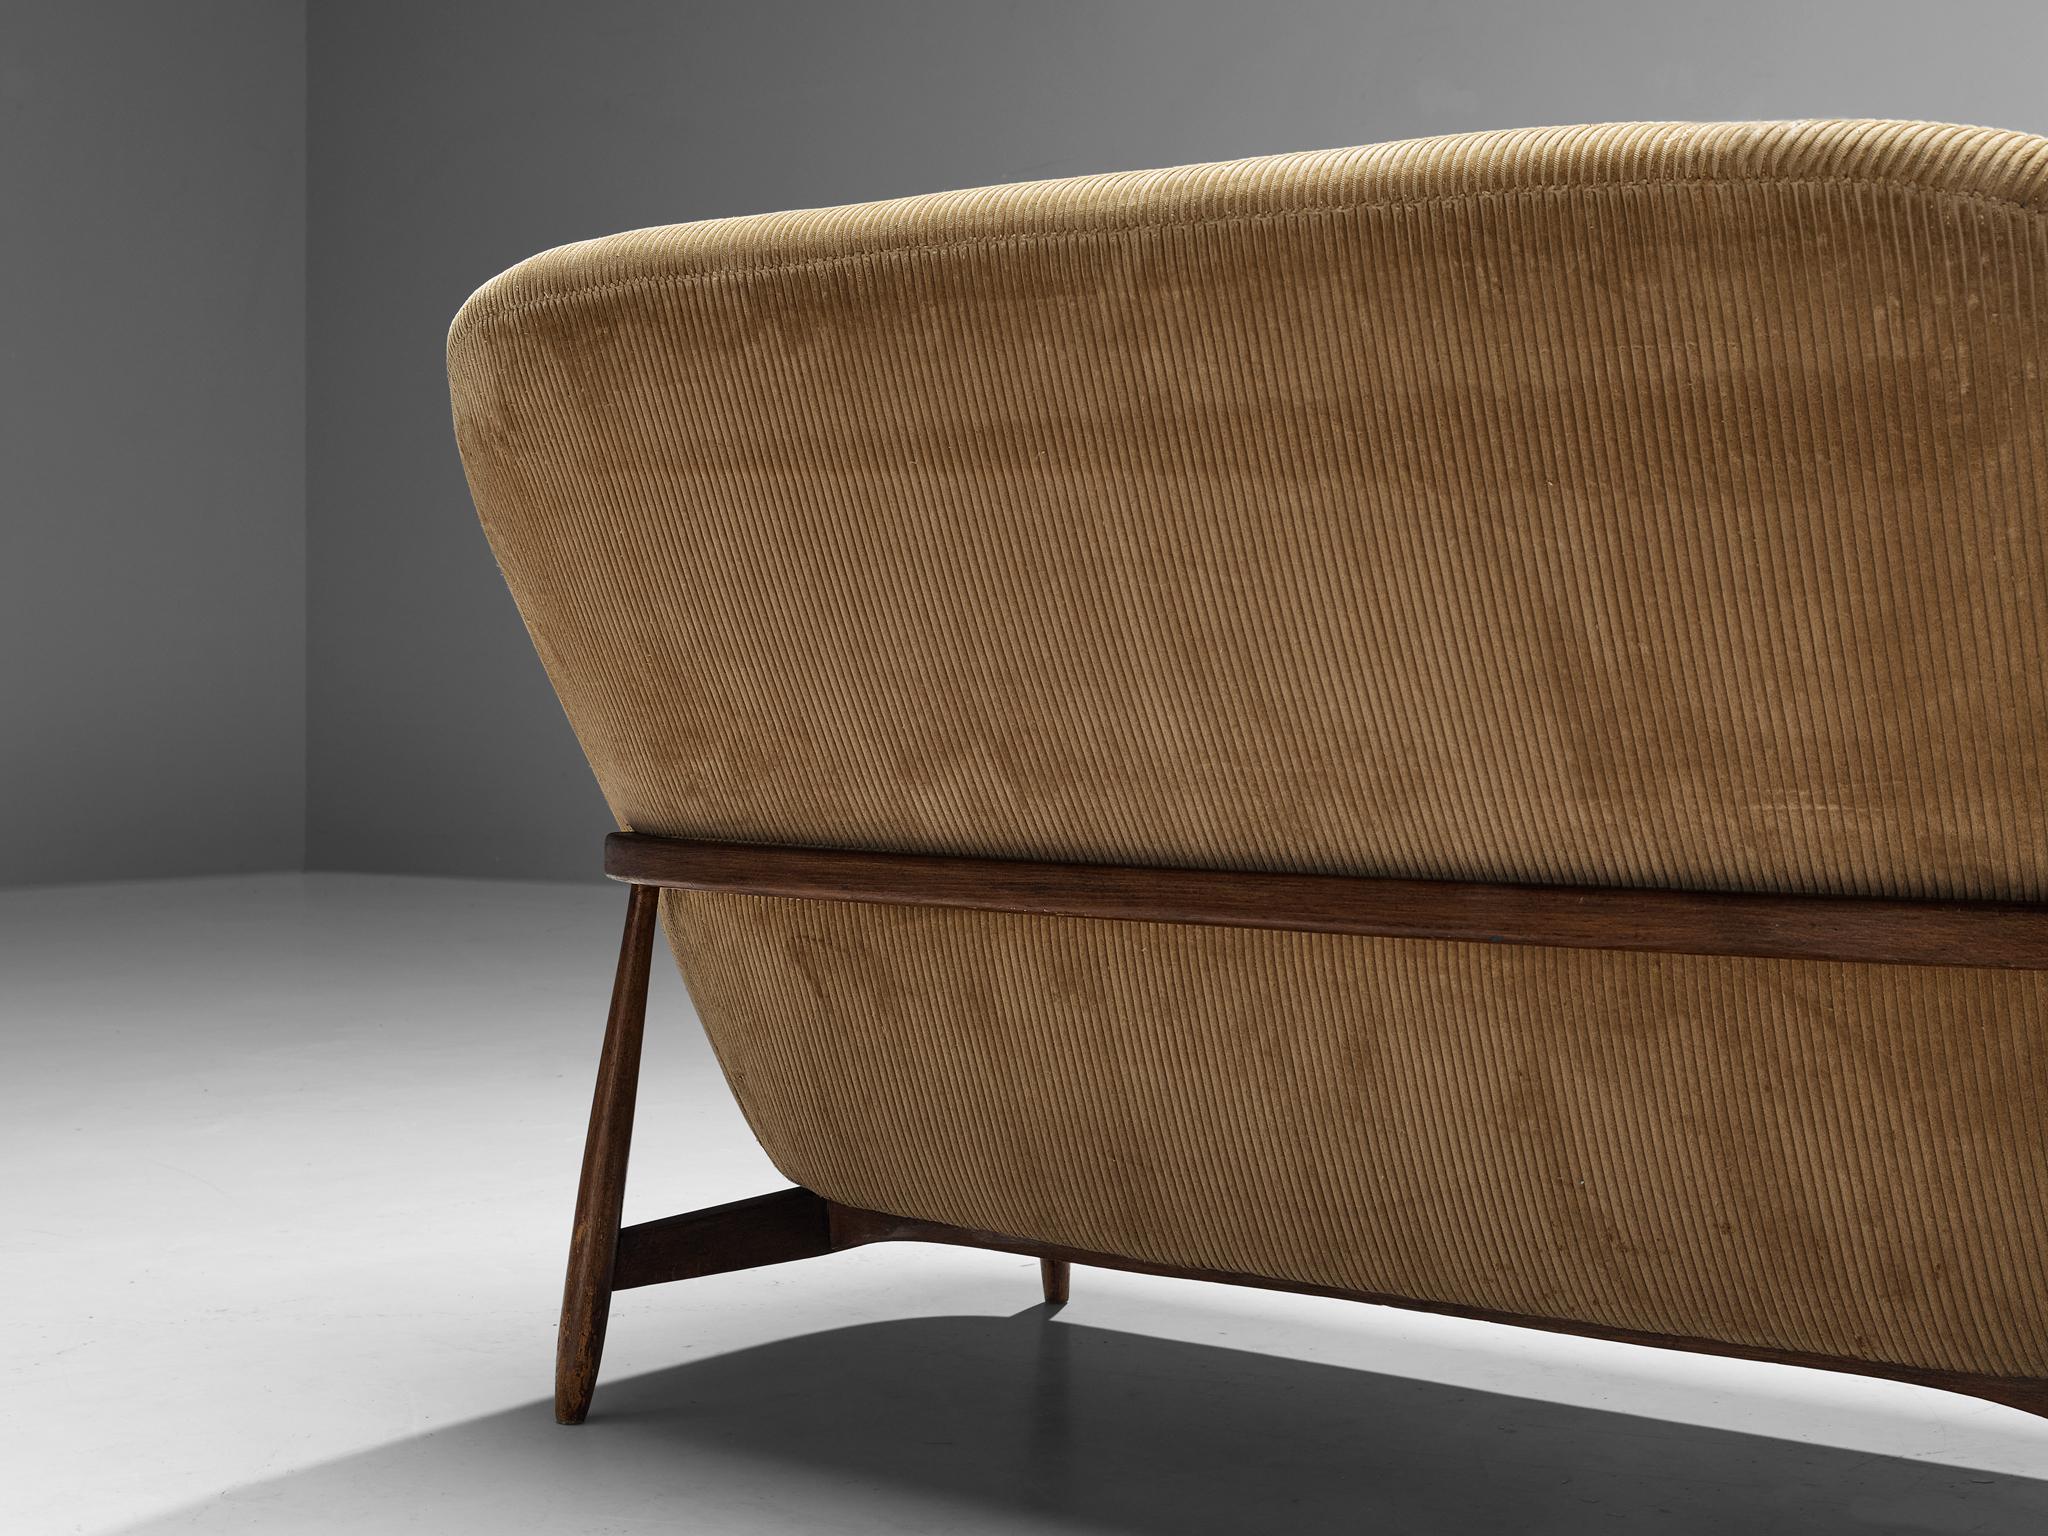 Late 20th Century Theo Ruth for Artifort Sofa in Beige Corduroy Upholstery  For Sale